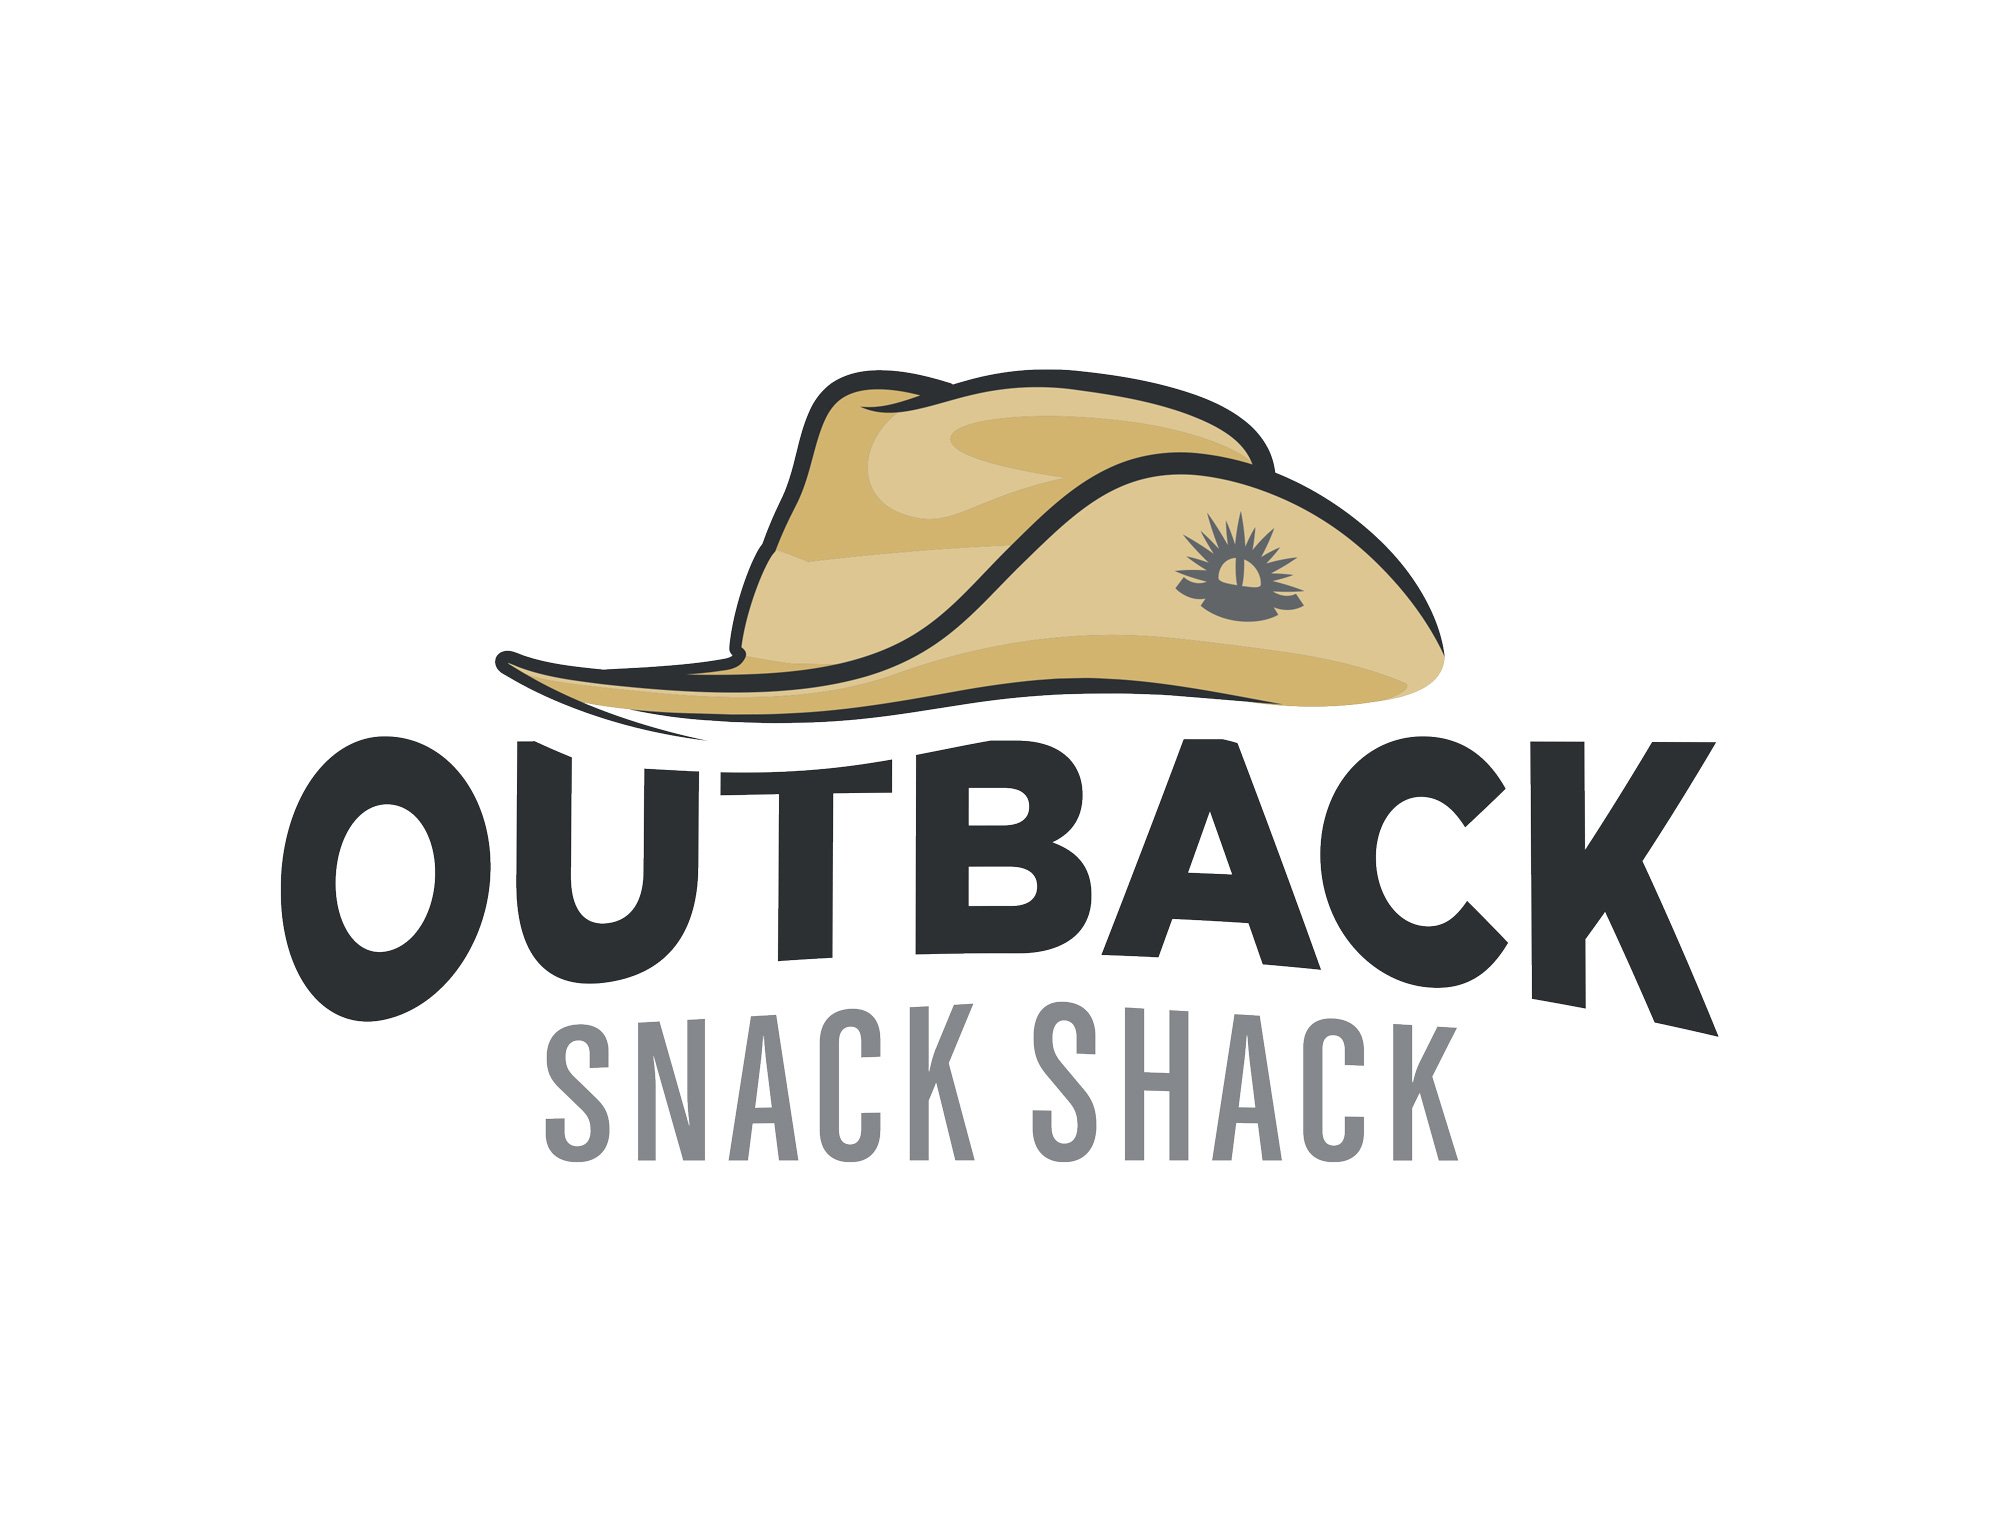 Graphic of an outback cap with text "Outback Snack Shack" under